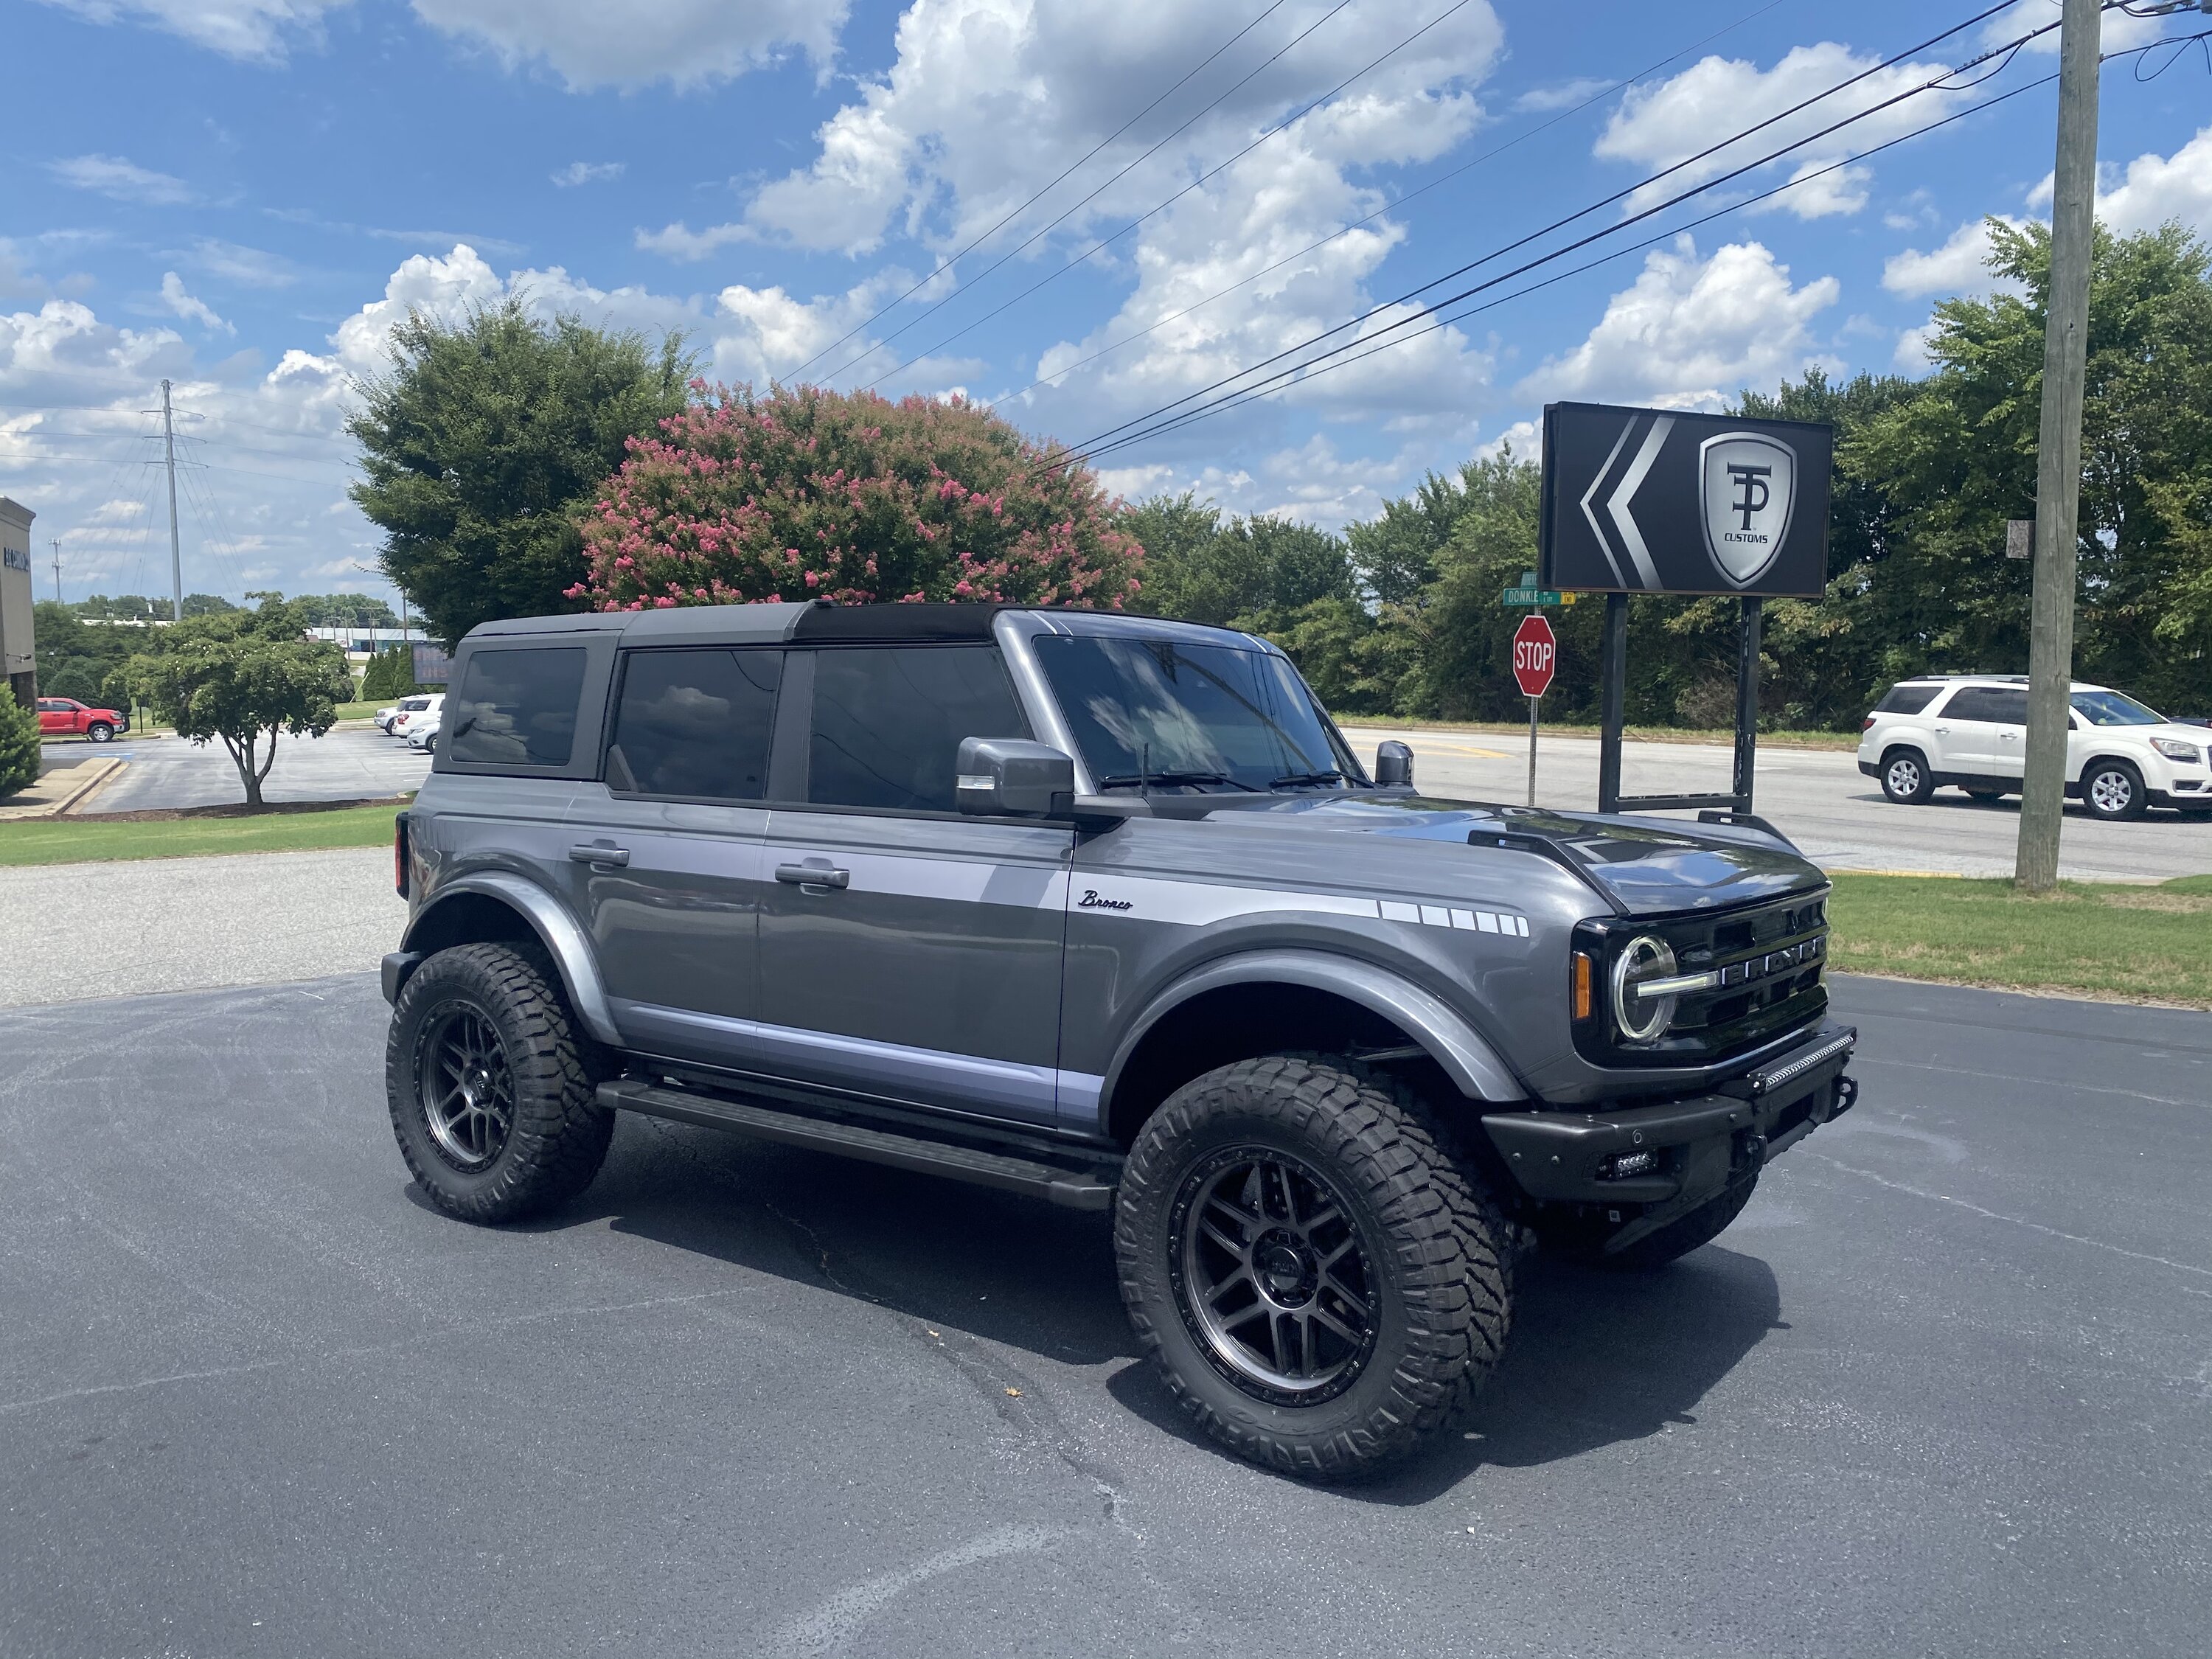 Ford Bronco OBX Tire-Wheels-Lift upgrades spreadsheet A76F3094-6968-4630-A8A4-791C3FF9459F